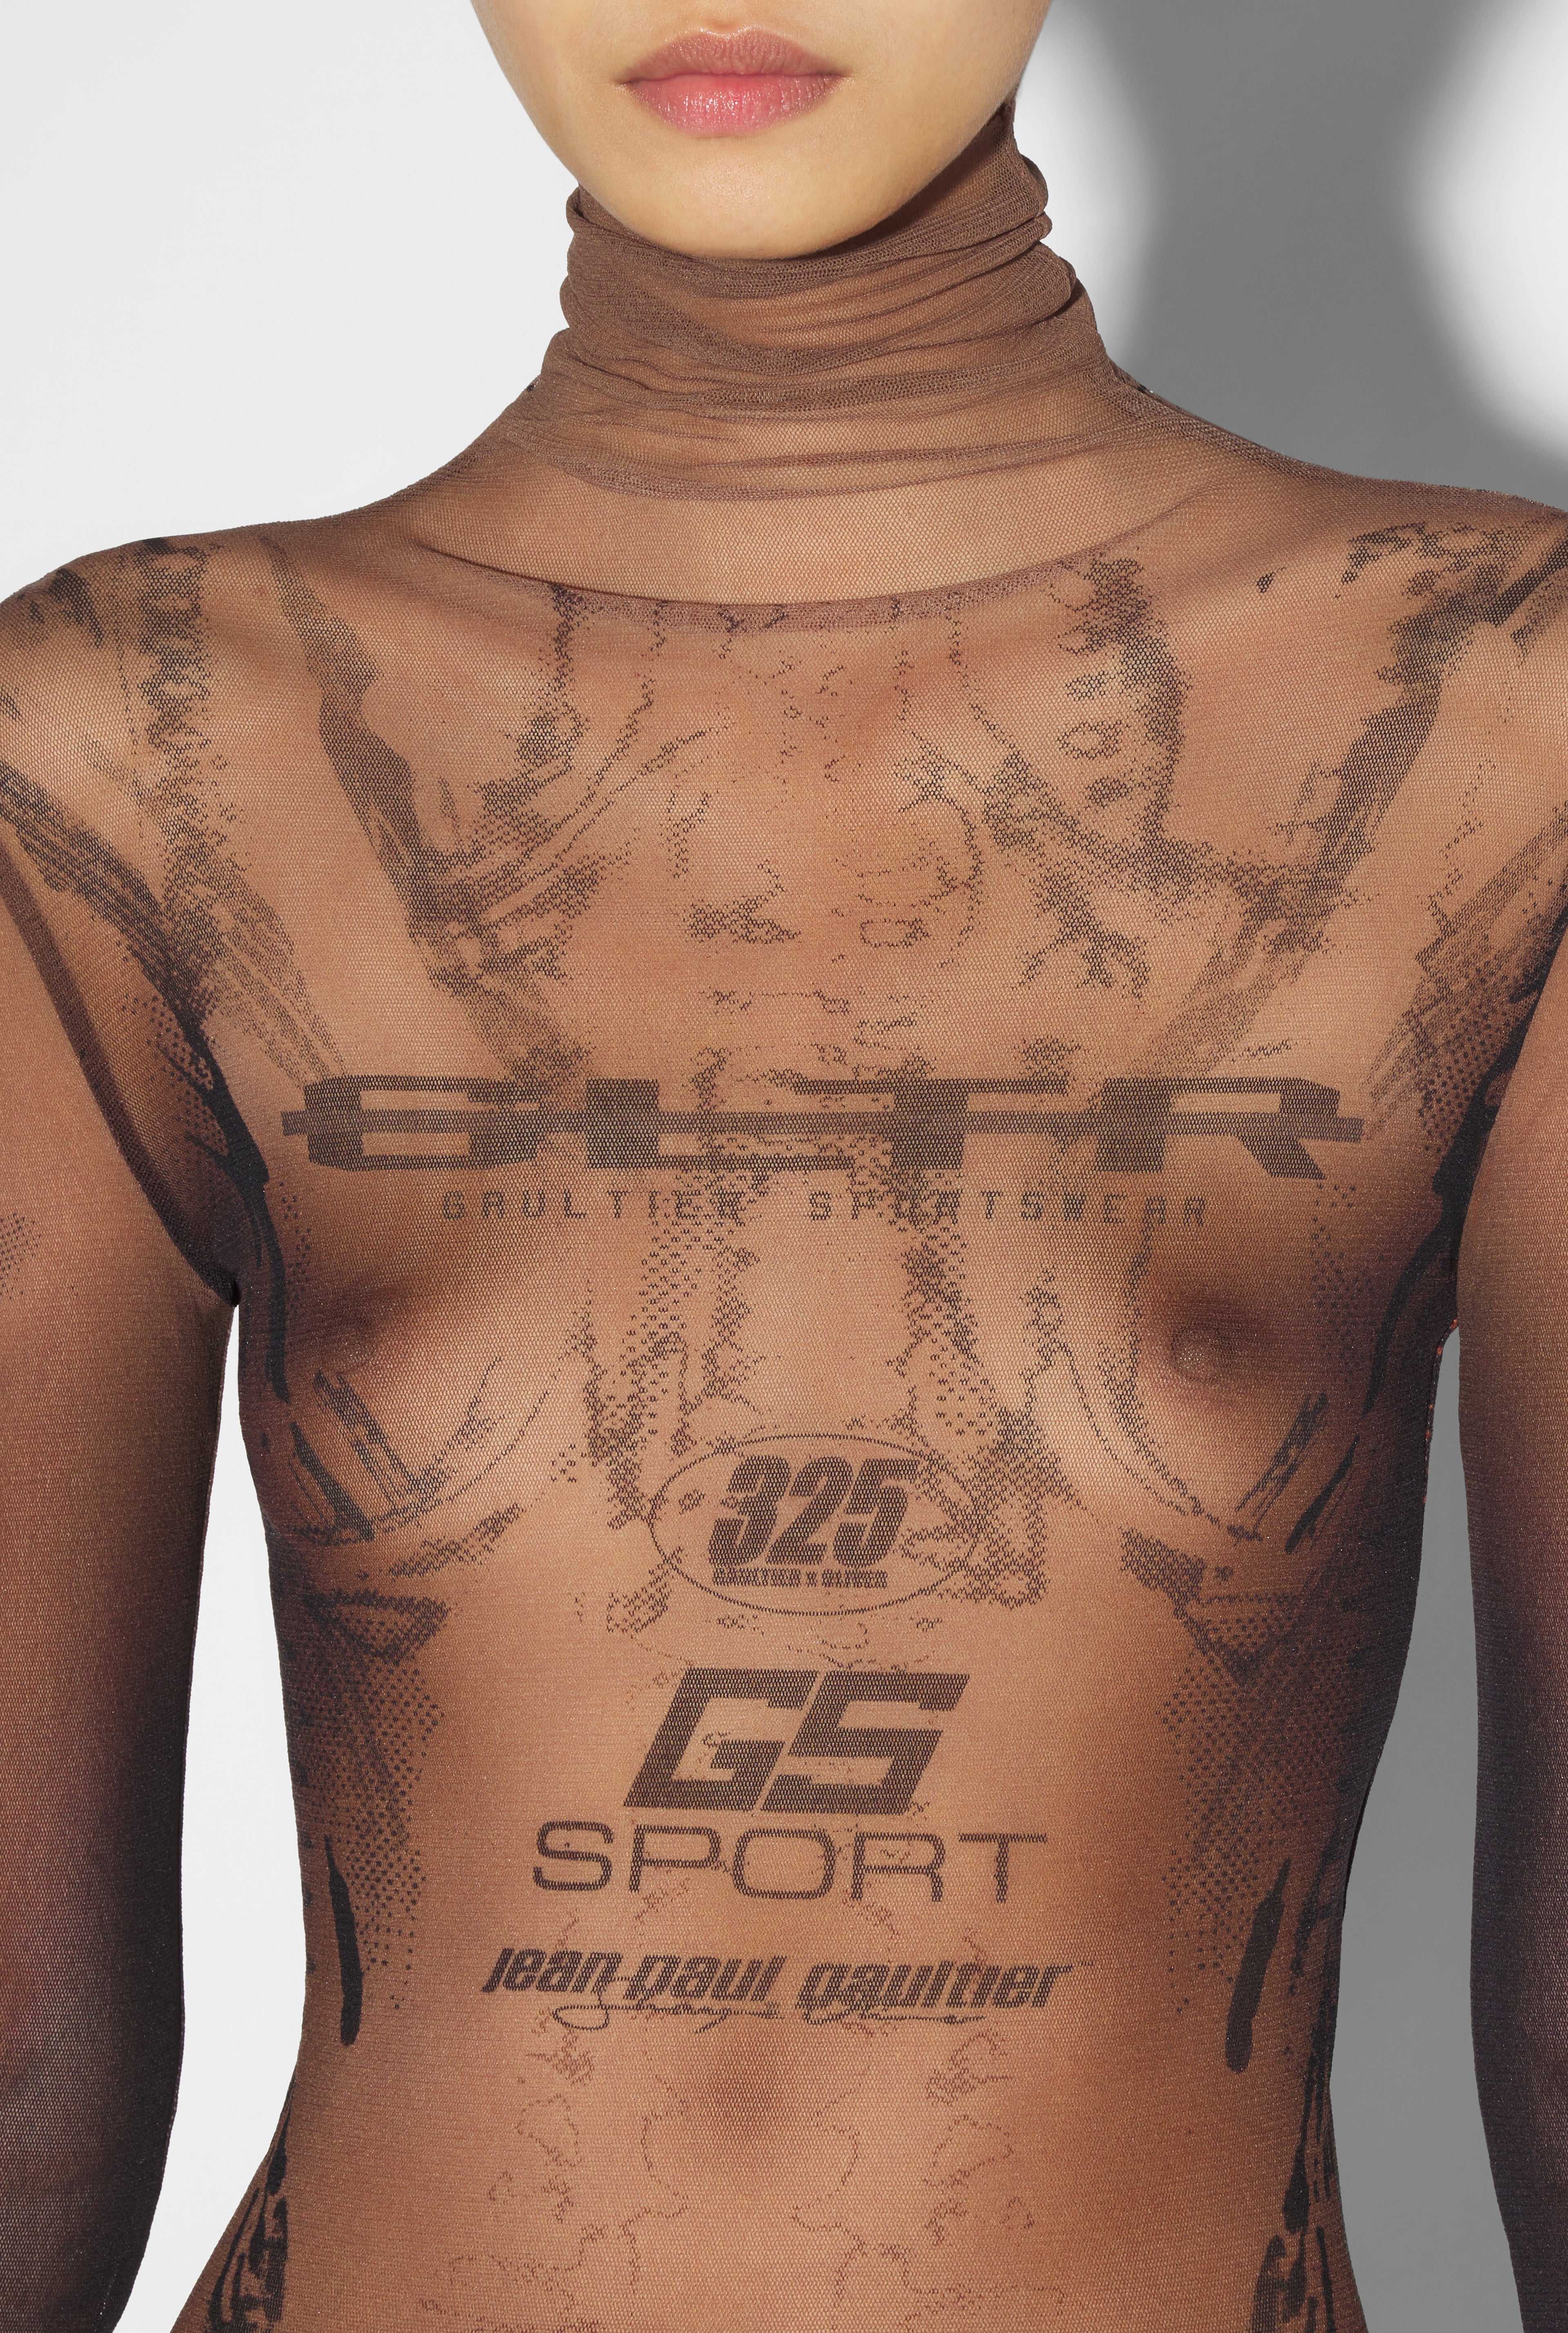 The GS Sport Top 